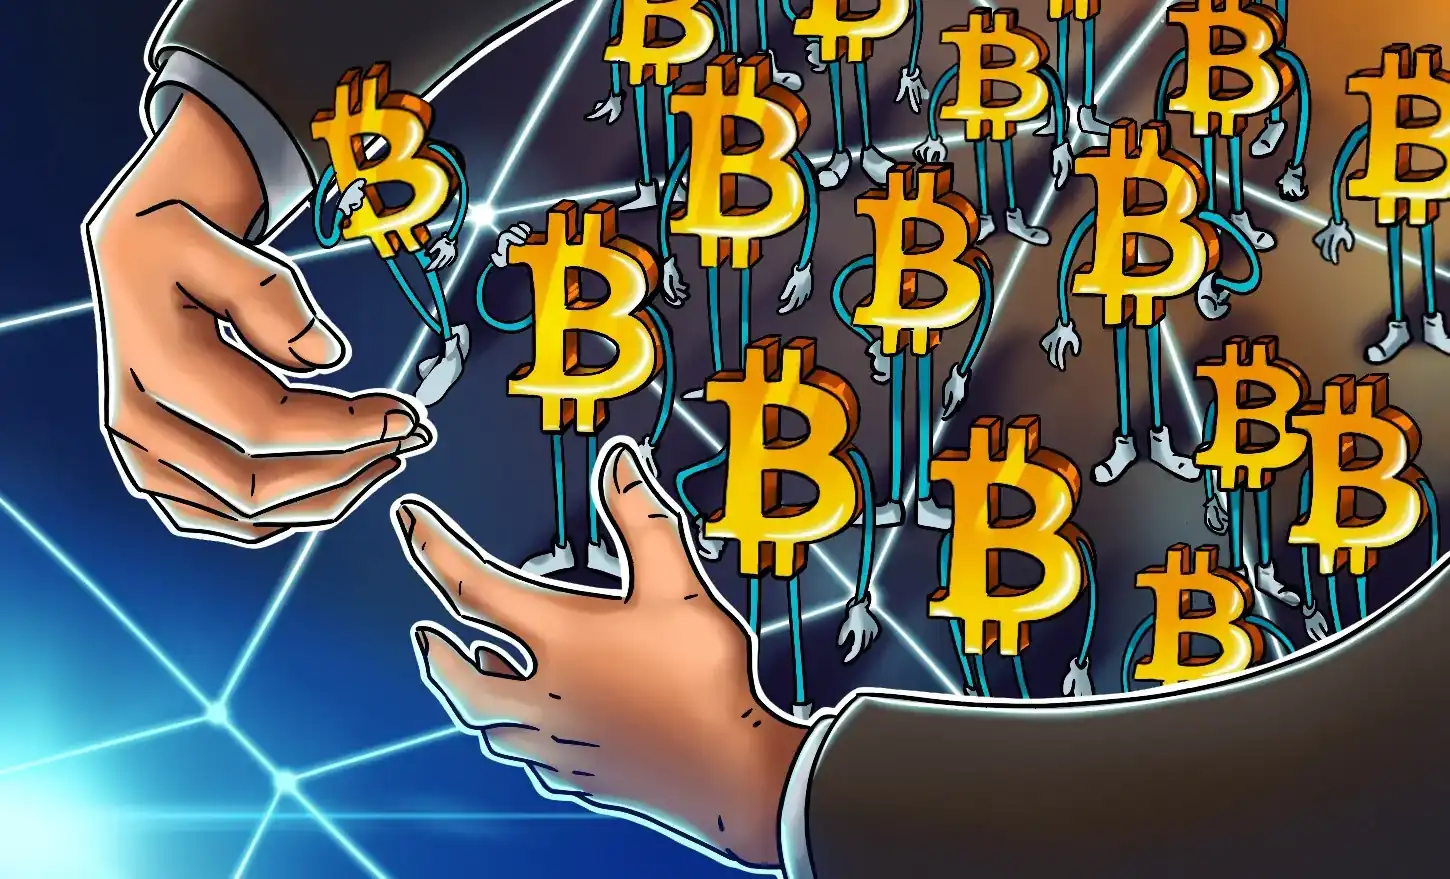 MicroStrategy Acquires 3,000 Bitcoin for $155M, Holdings Reach 193,000 BTC